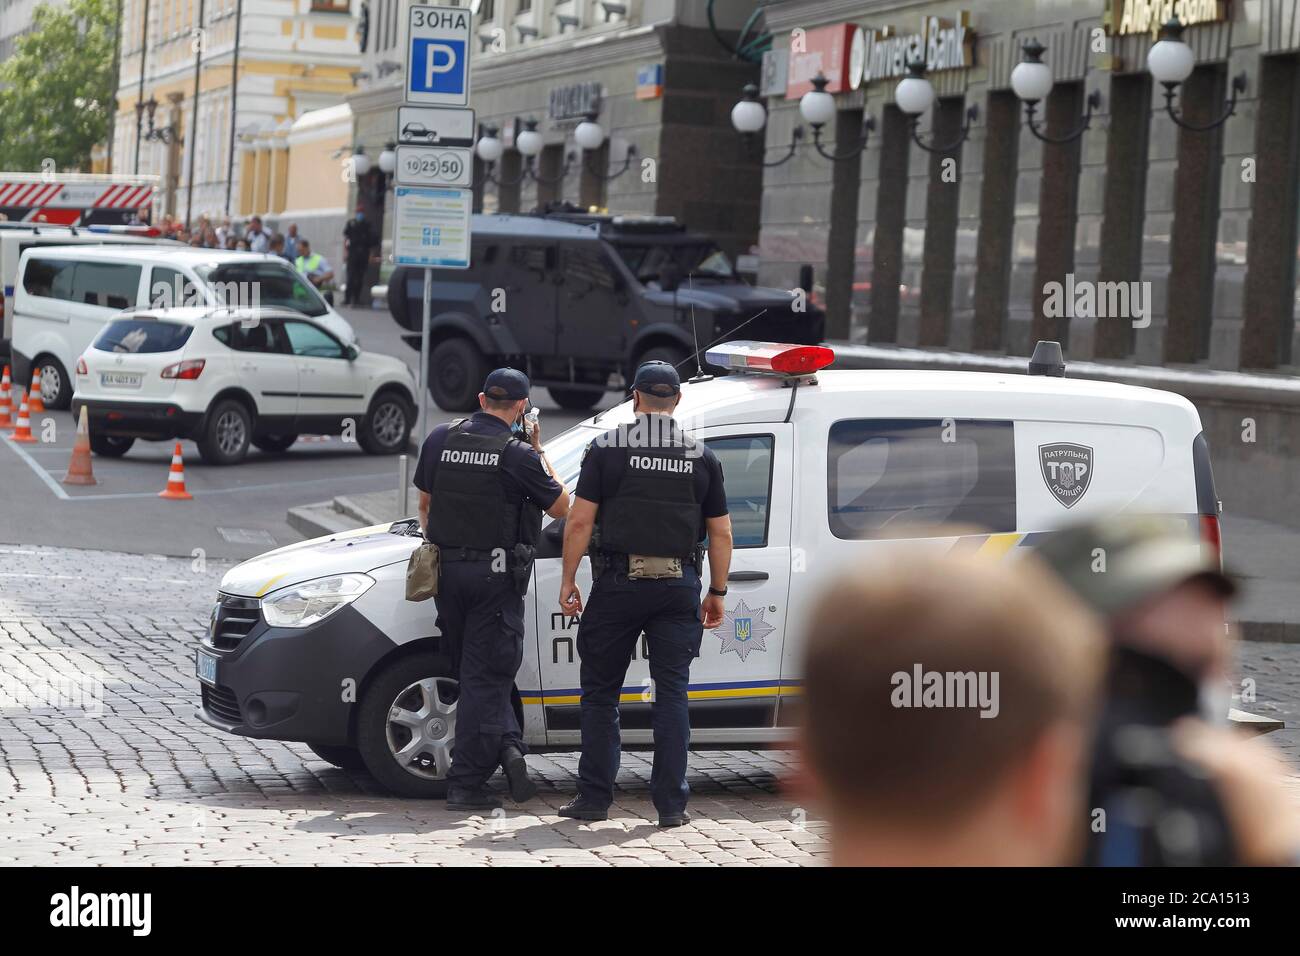 Police officers stand near the building where an unidentified man threatens to blow up a bomb at the Universal bank office.Members of the Security Service of Ukraine (SBU) specops unit detained in a raid a perpetrator, identified as Uzbekistan's Sukhrob Karimov, who threatened to blow up a bank office in the capital city of Kyiv and claimed he was carrying a bomb in his backpack, reportedly by media. Stock Photo